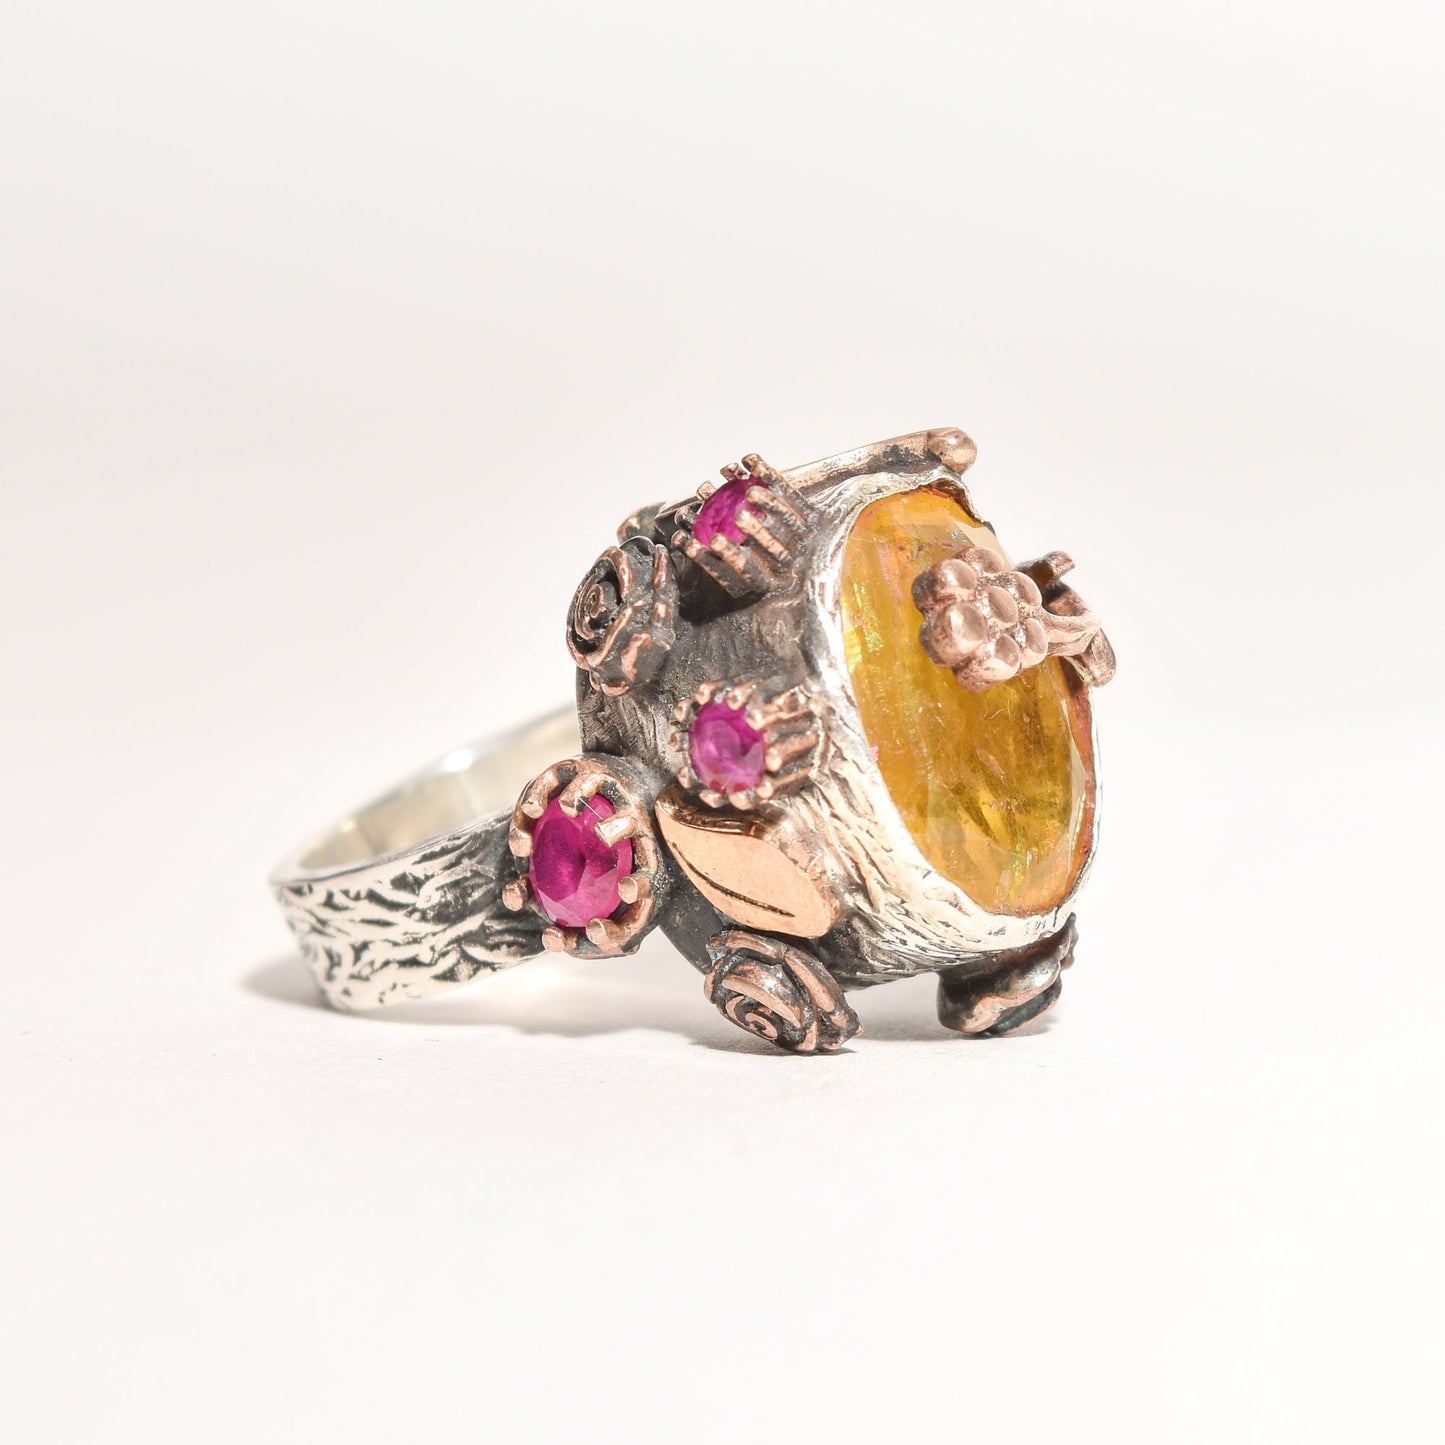 Brutalist-style sterling silver two-tone statement ring with citrine and ruby flowers, size 6.25 US, on a white background.